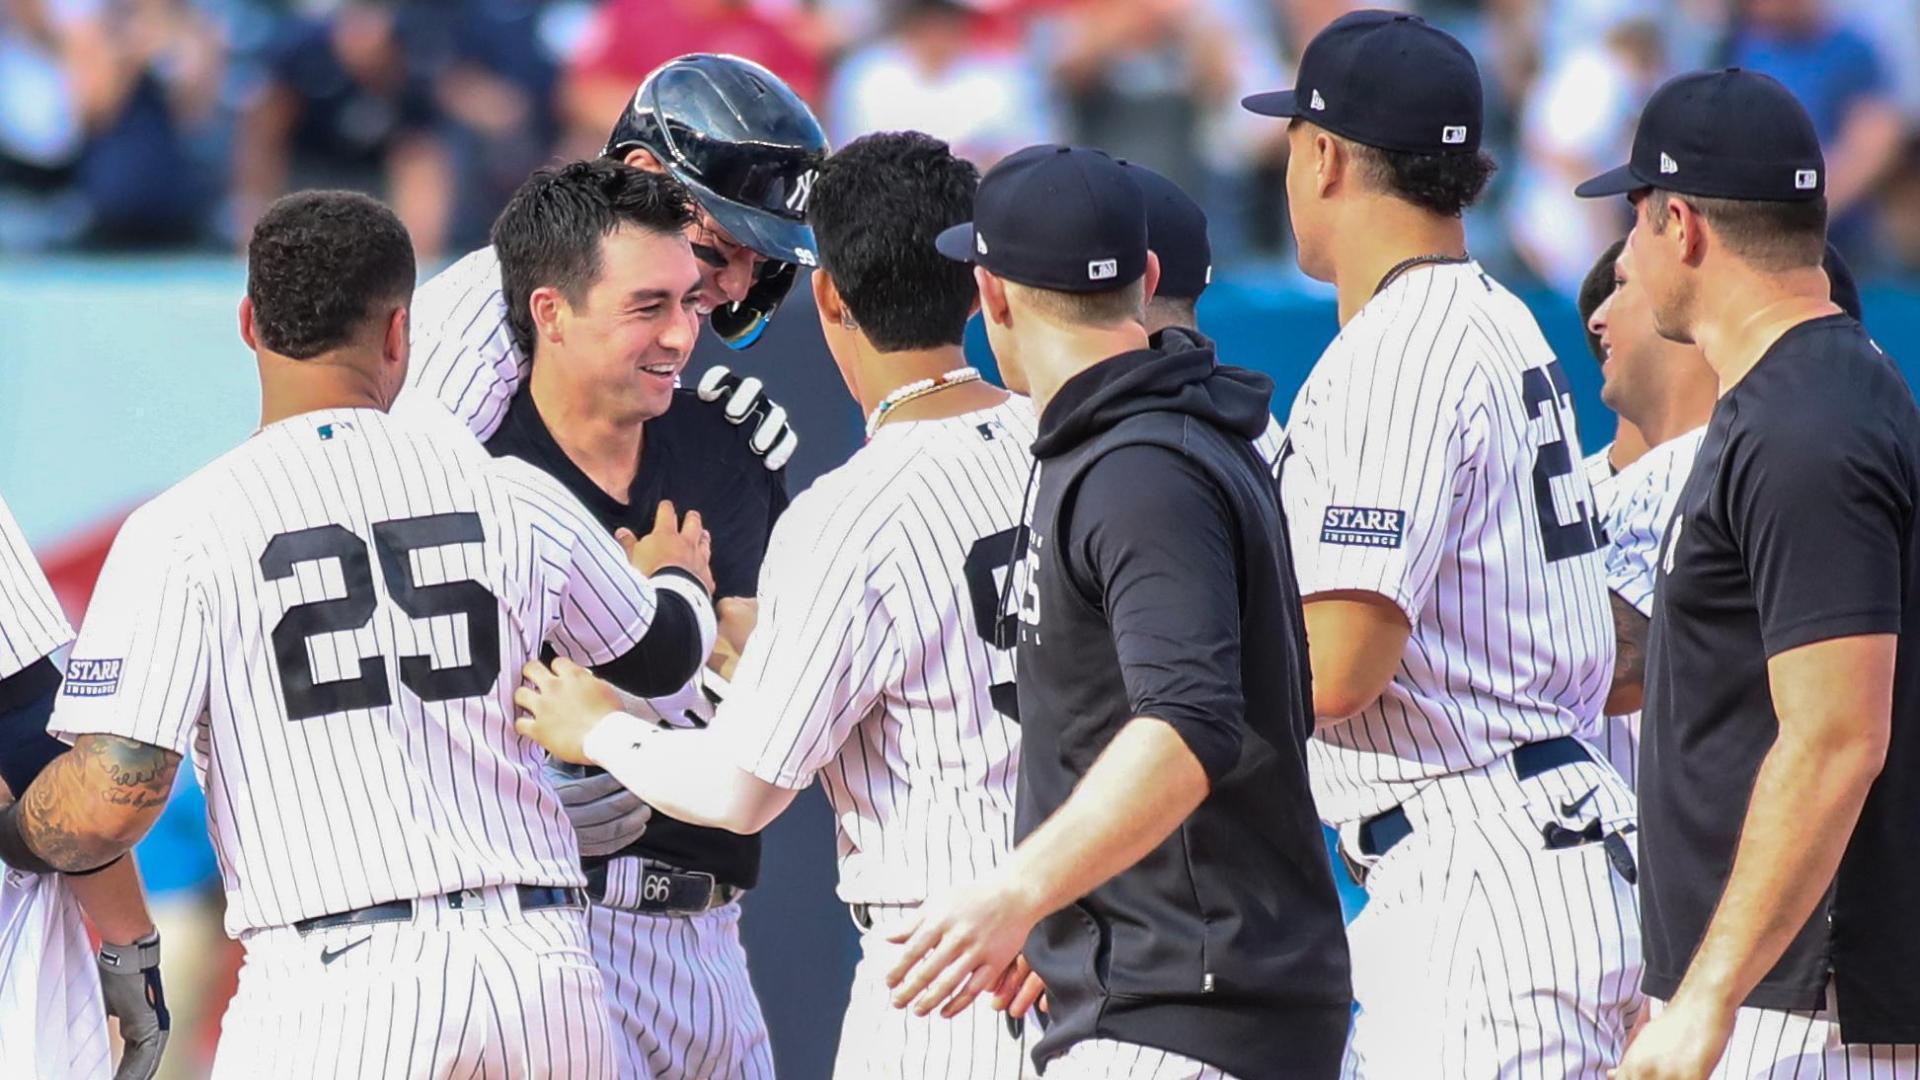 Frelick's catch in 10th preserves no-hit bid, Yankees rally to beat Brewers  4-3 in 13th - NBC Sports